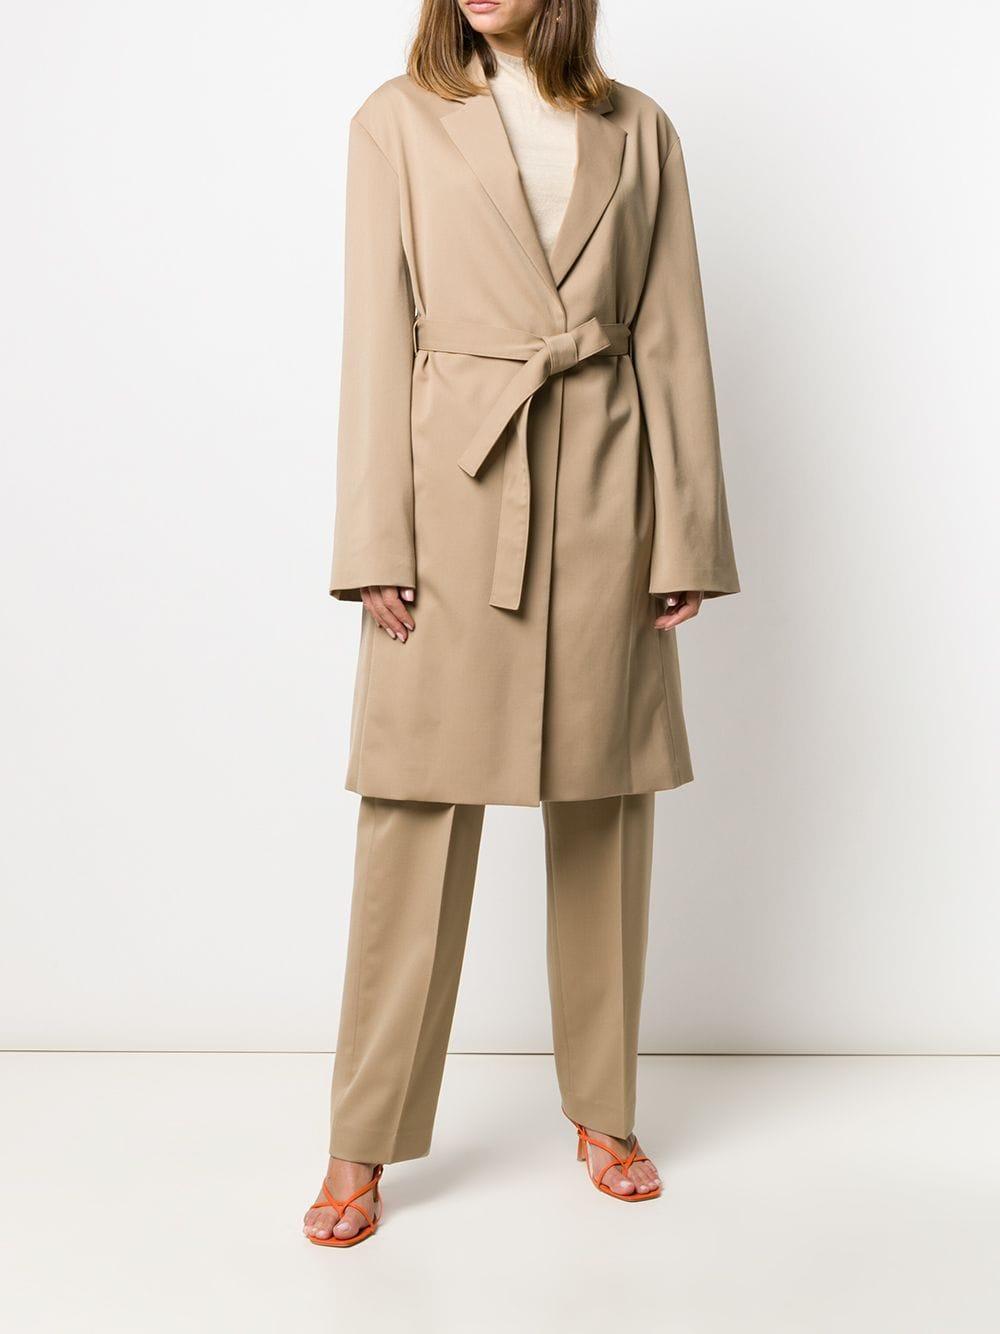 Filippa K Wool Amie Belted Mid-length Coat in Natural - Lyst